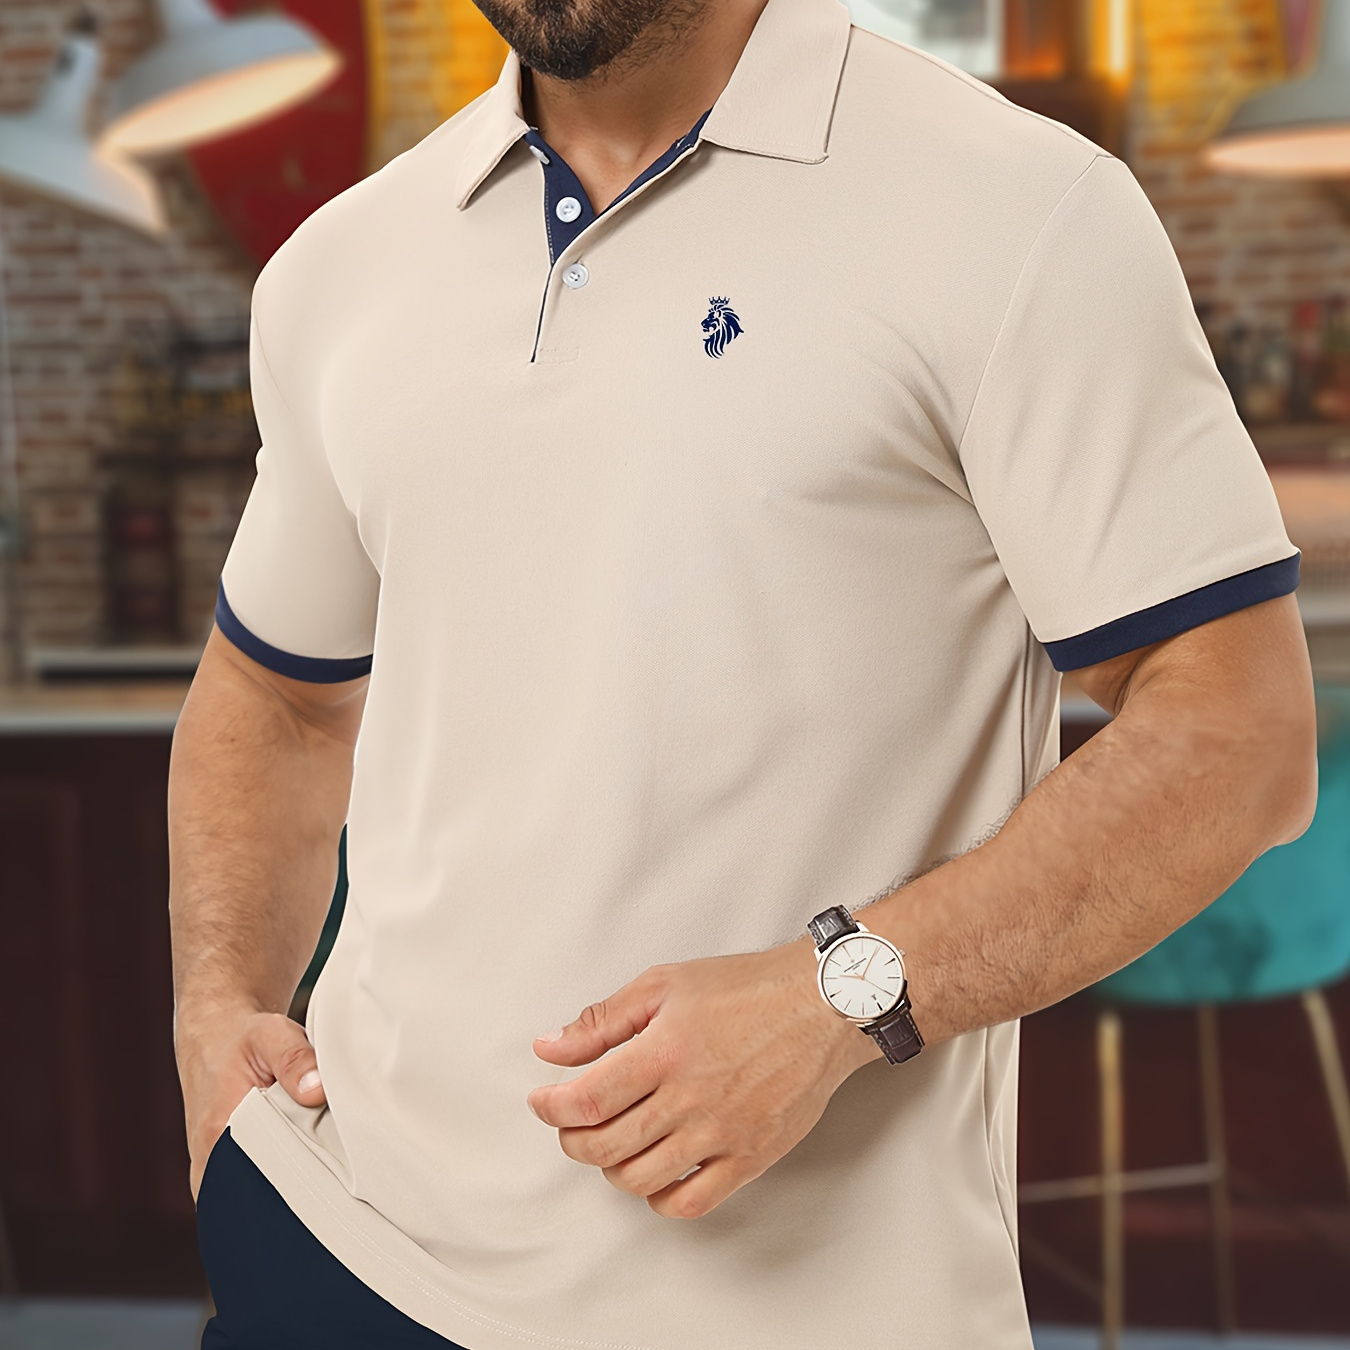 

Lion With Crown Print Summer Men's Fashionable Lapel Short Sleeve Golf T-shirt, Suitable For Commercial Entertainment Occasions, Such As Tennis And Golf, Men's Clothing, As Gifts